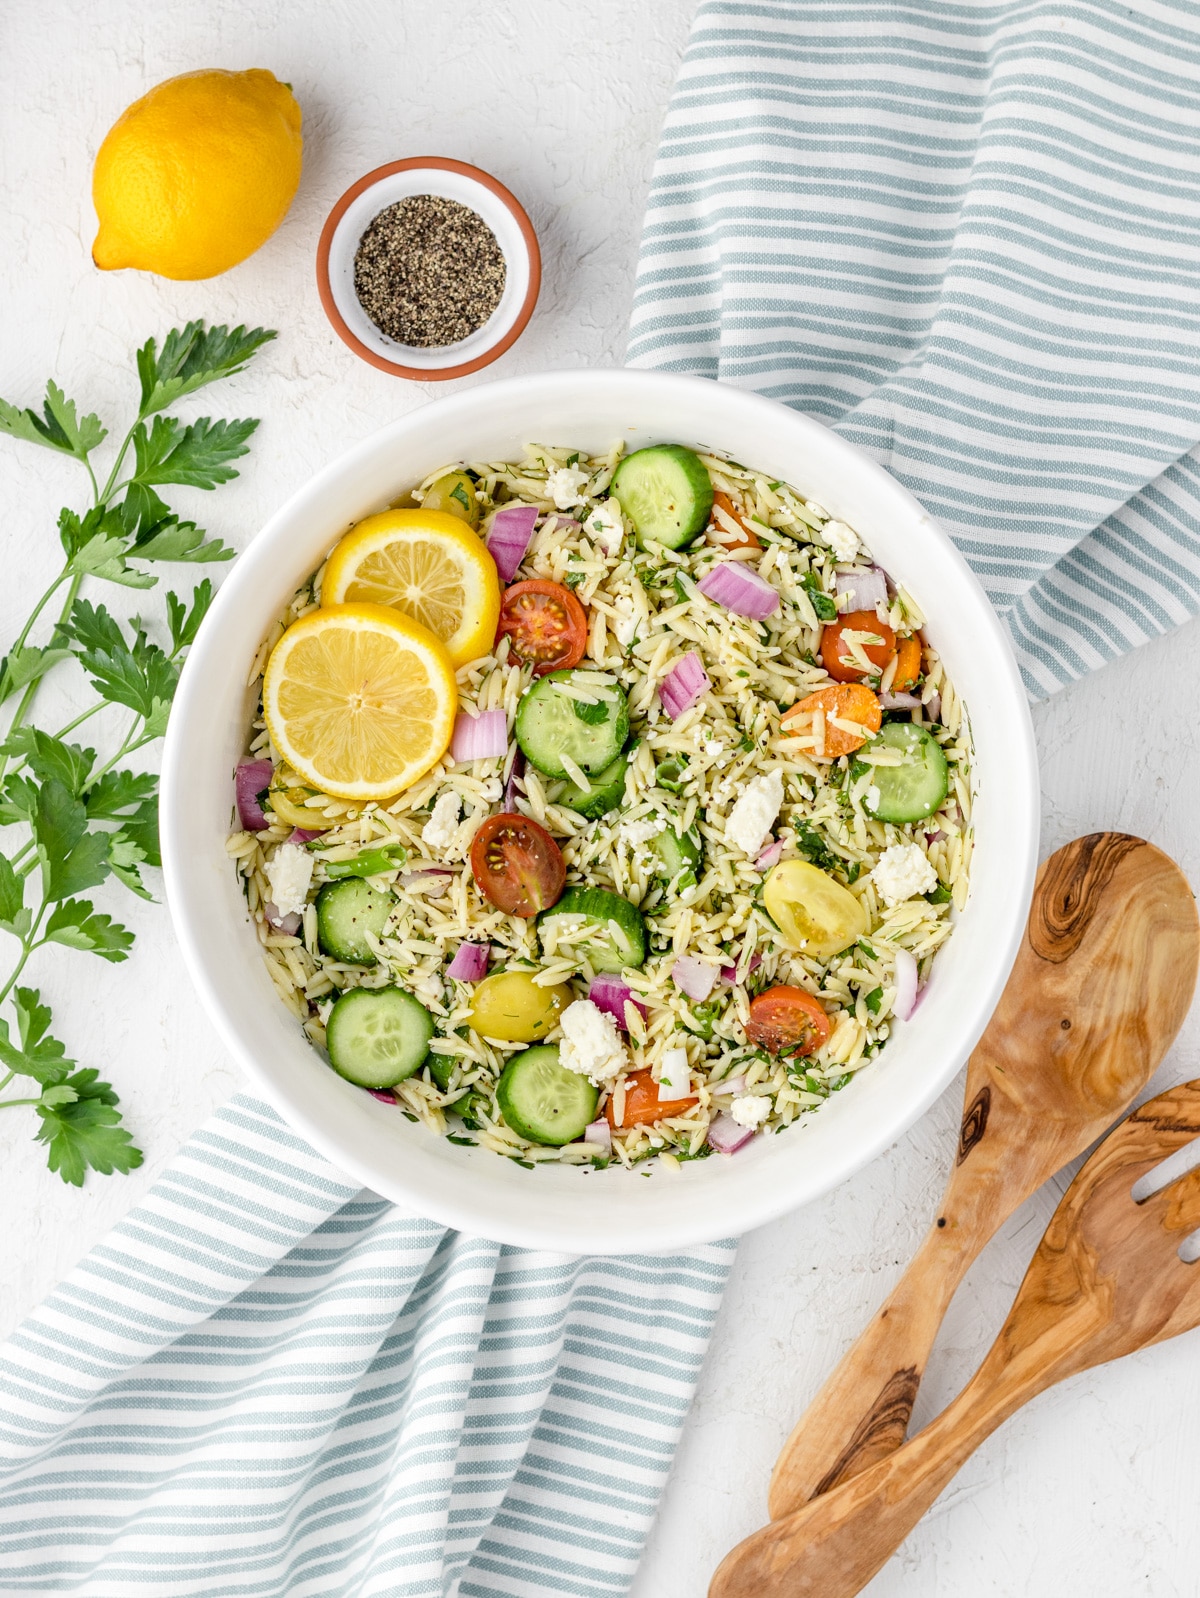 Lemon Orzo Salad with feta and toppings mixed with dressing made of lemon juice, lemon zest, olive oil, salt, and black pepper.